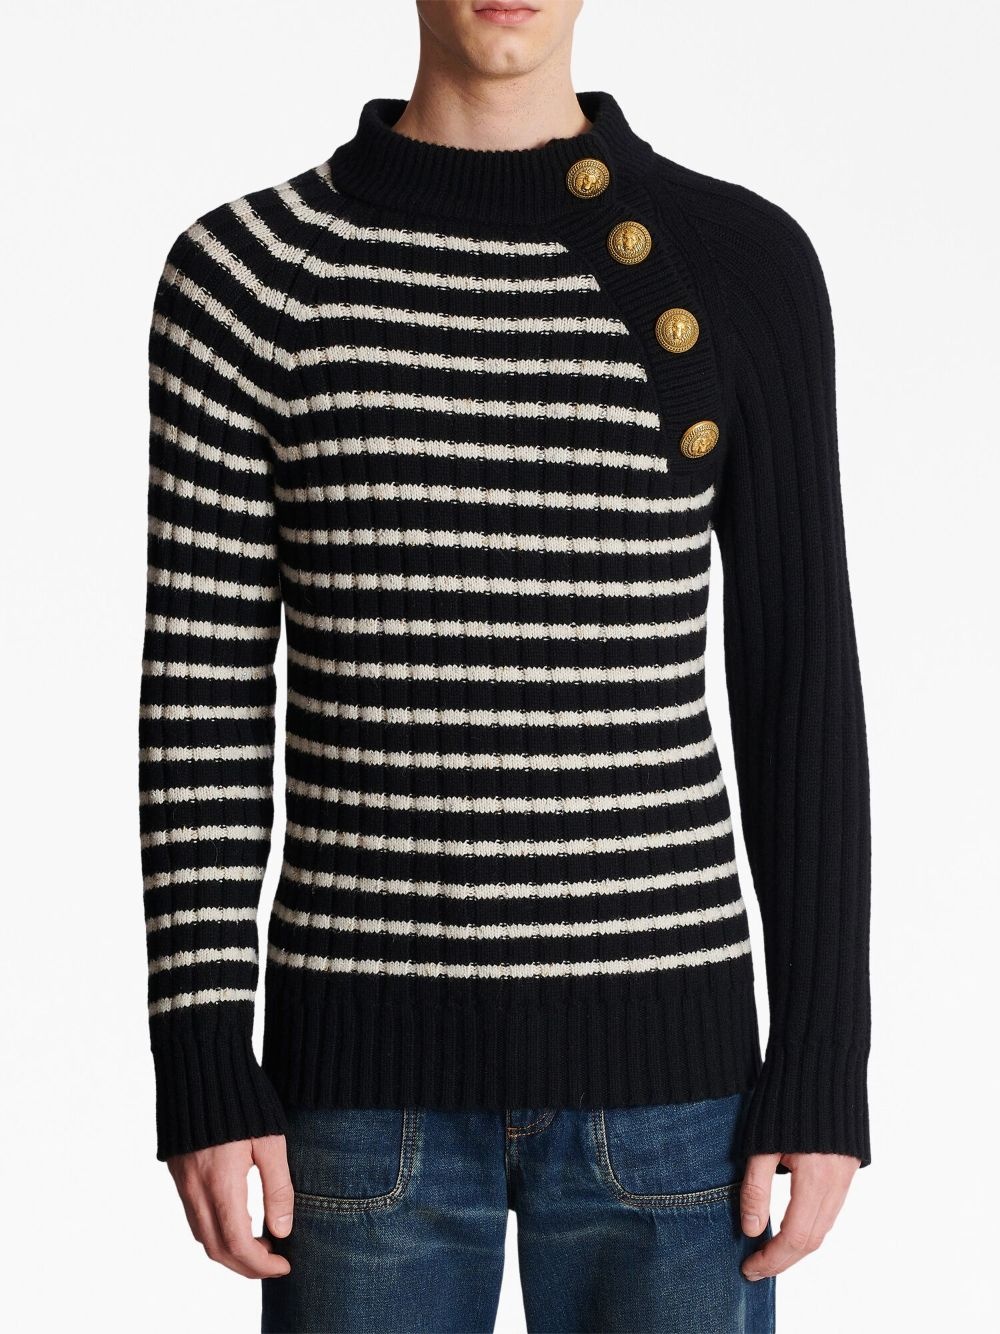 embossed-button striped jumper - 5